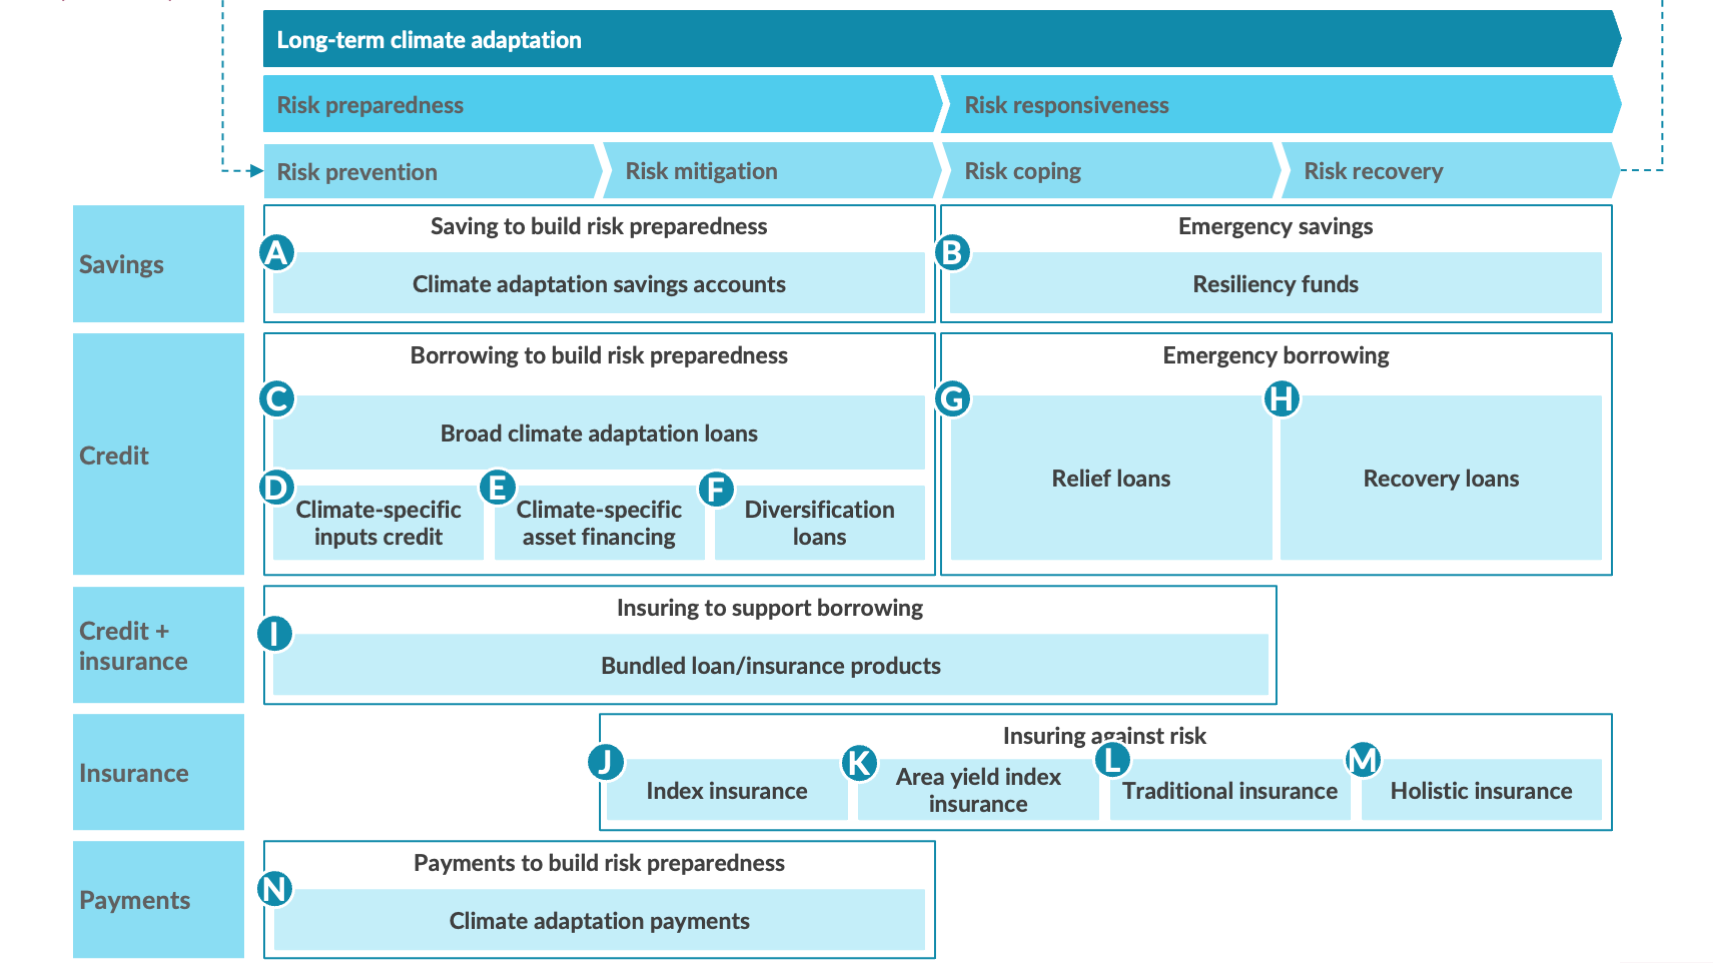 Figure 1: A proposed taxonomy of climate-responsive financial services 